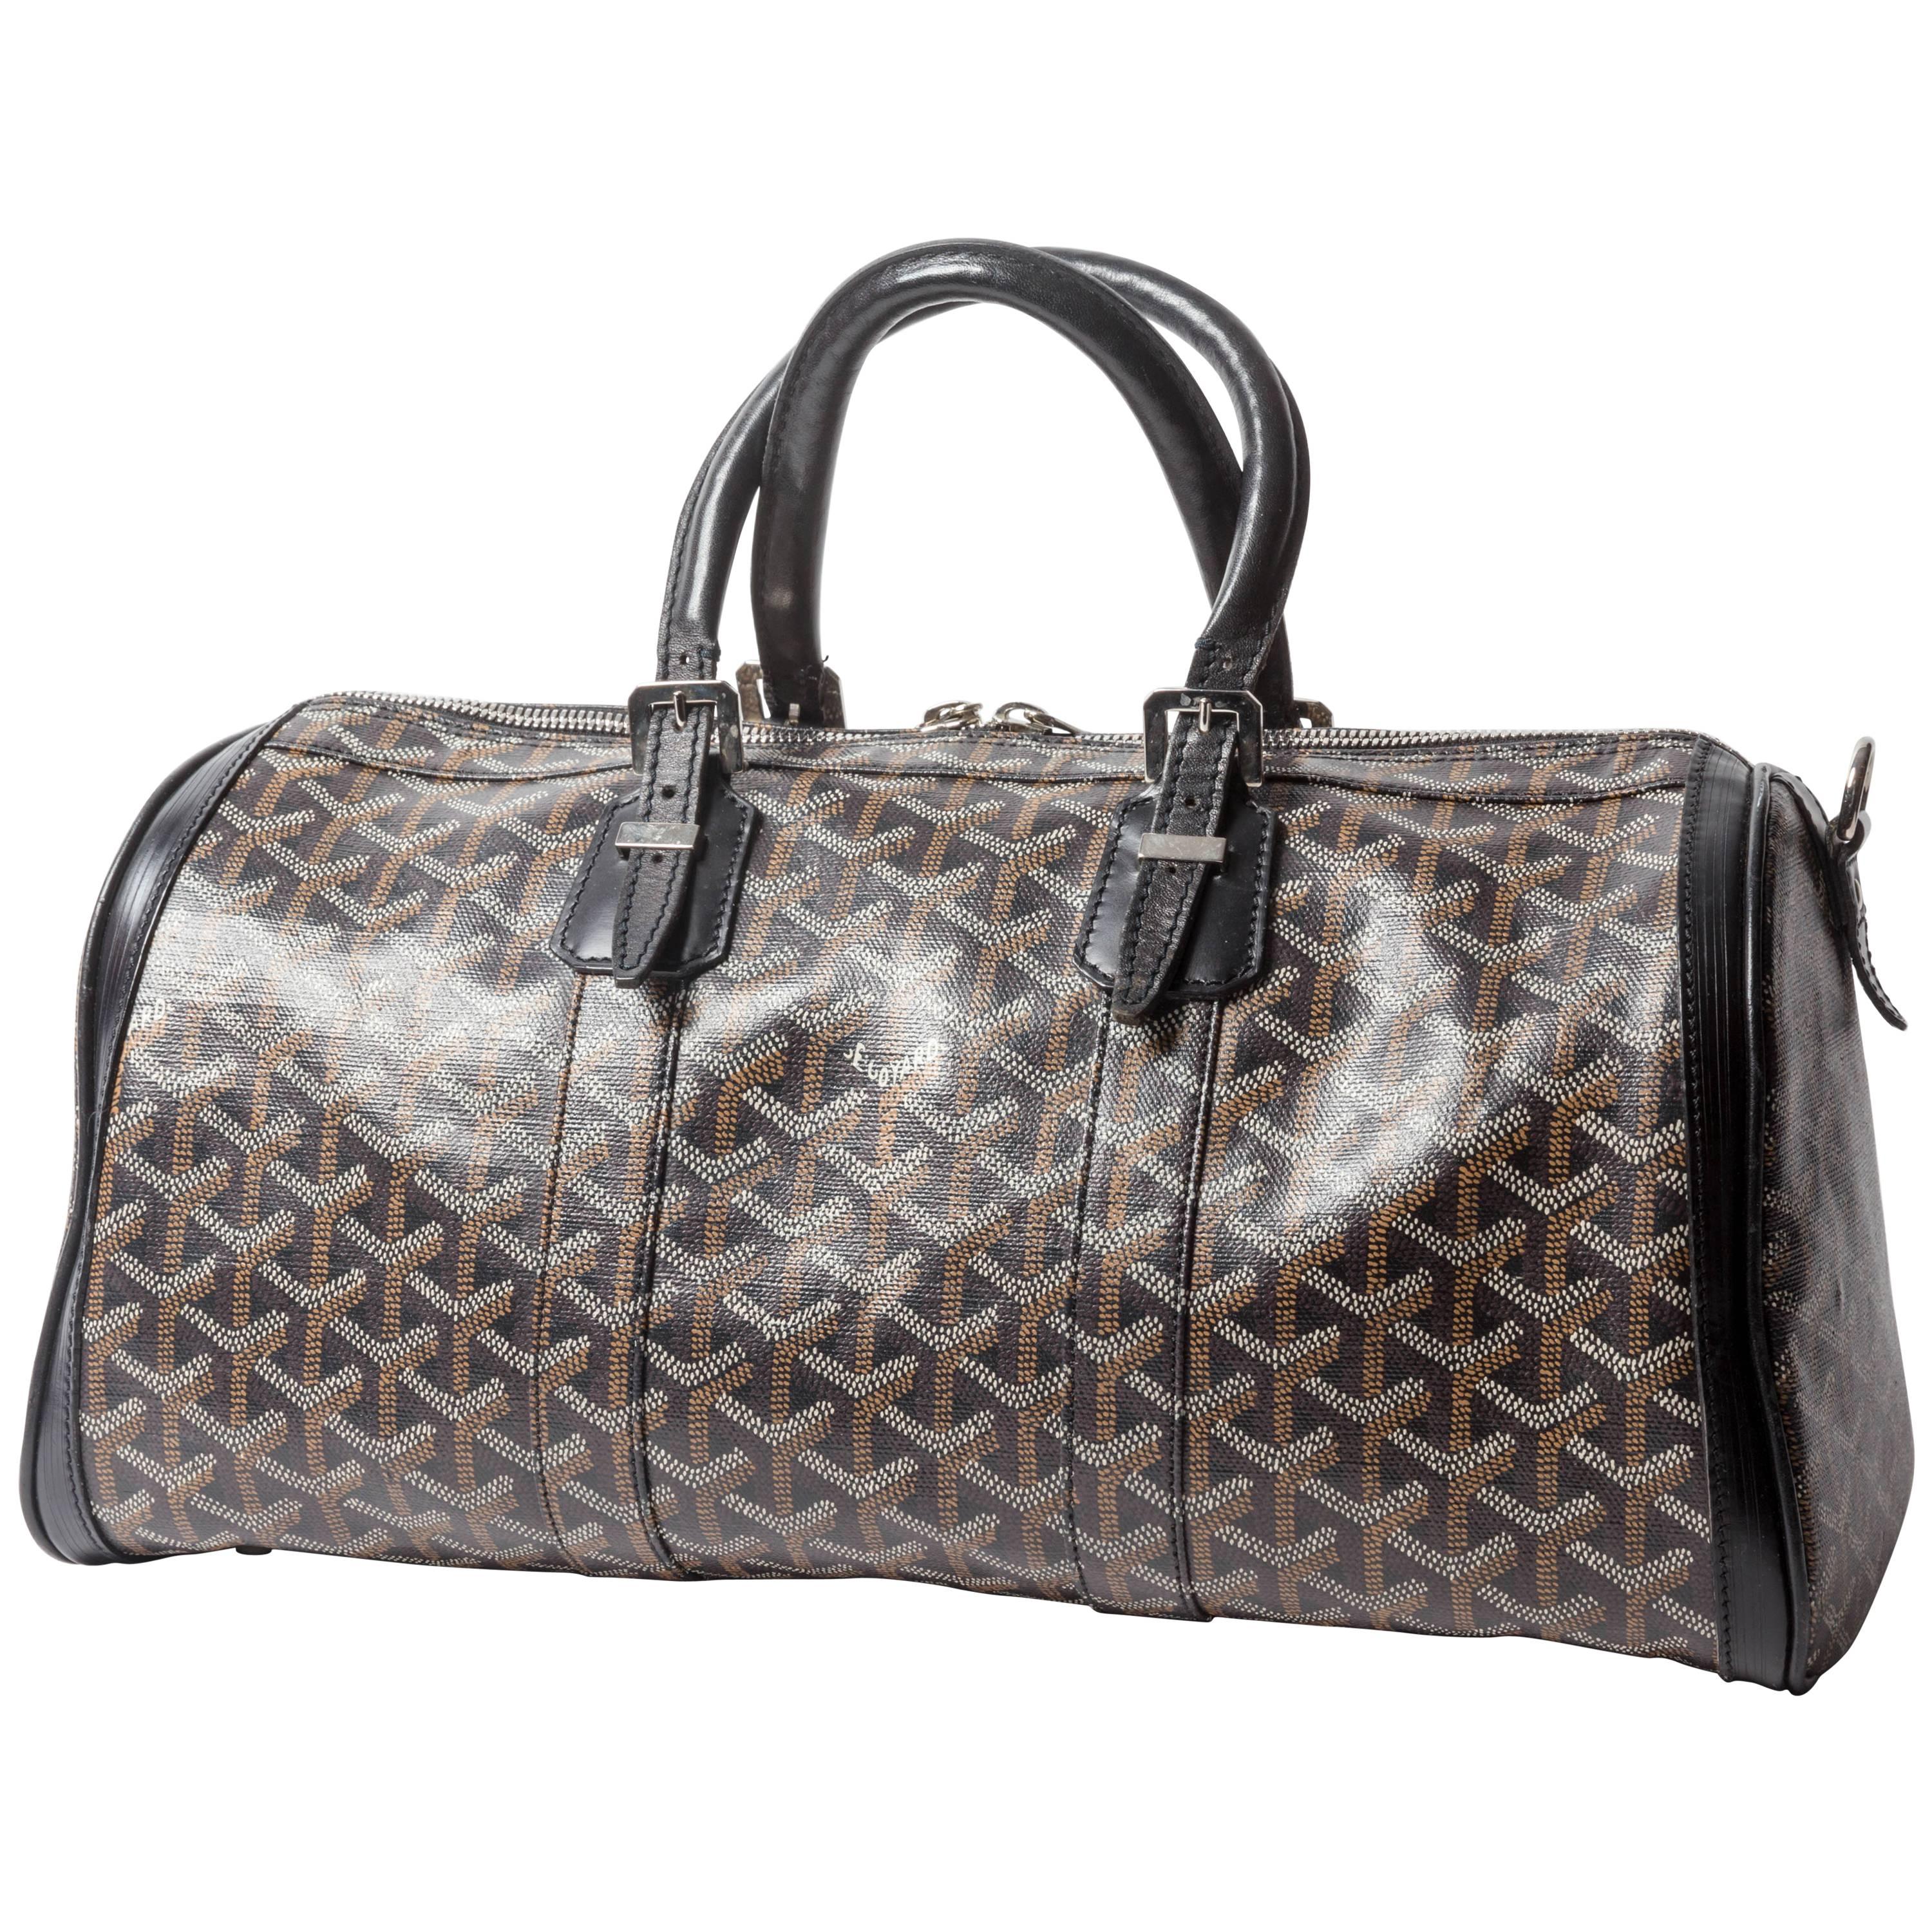 Croisiere 35 Top Handle Bag in Coated Canvas, Silver Hardware